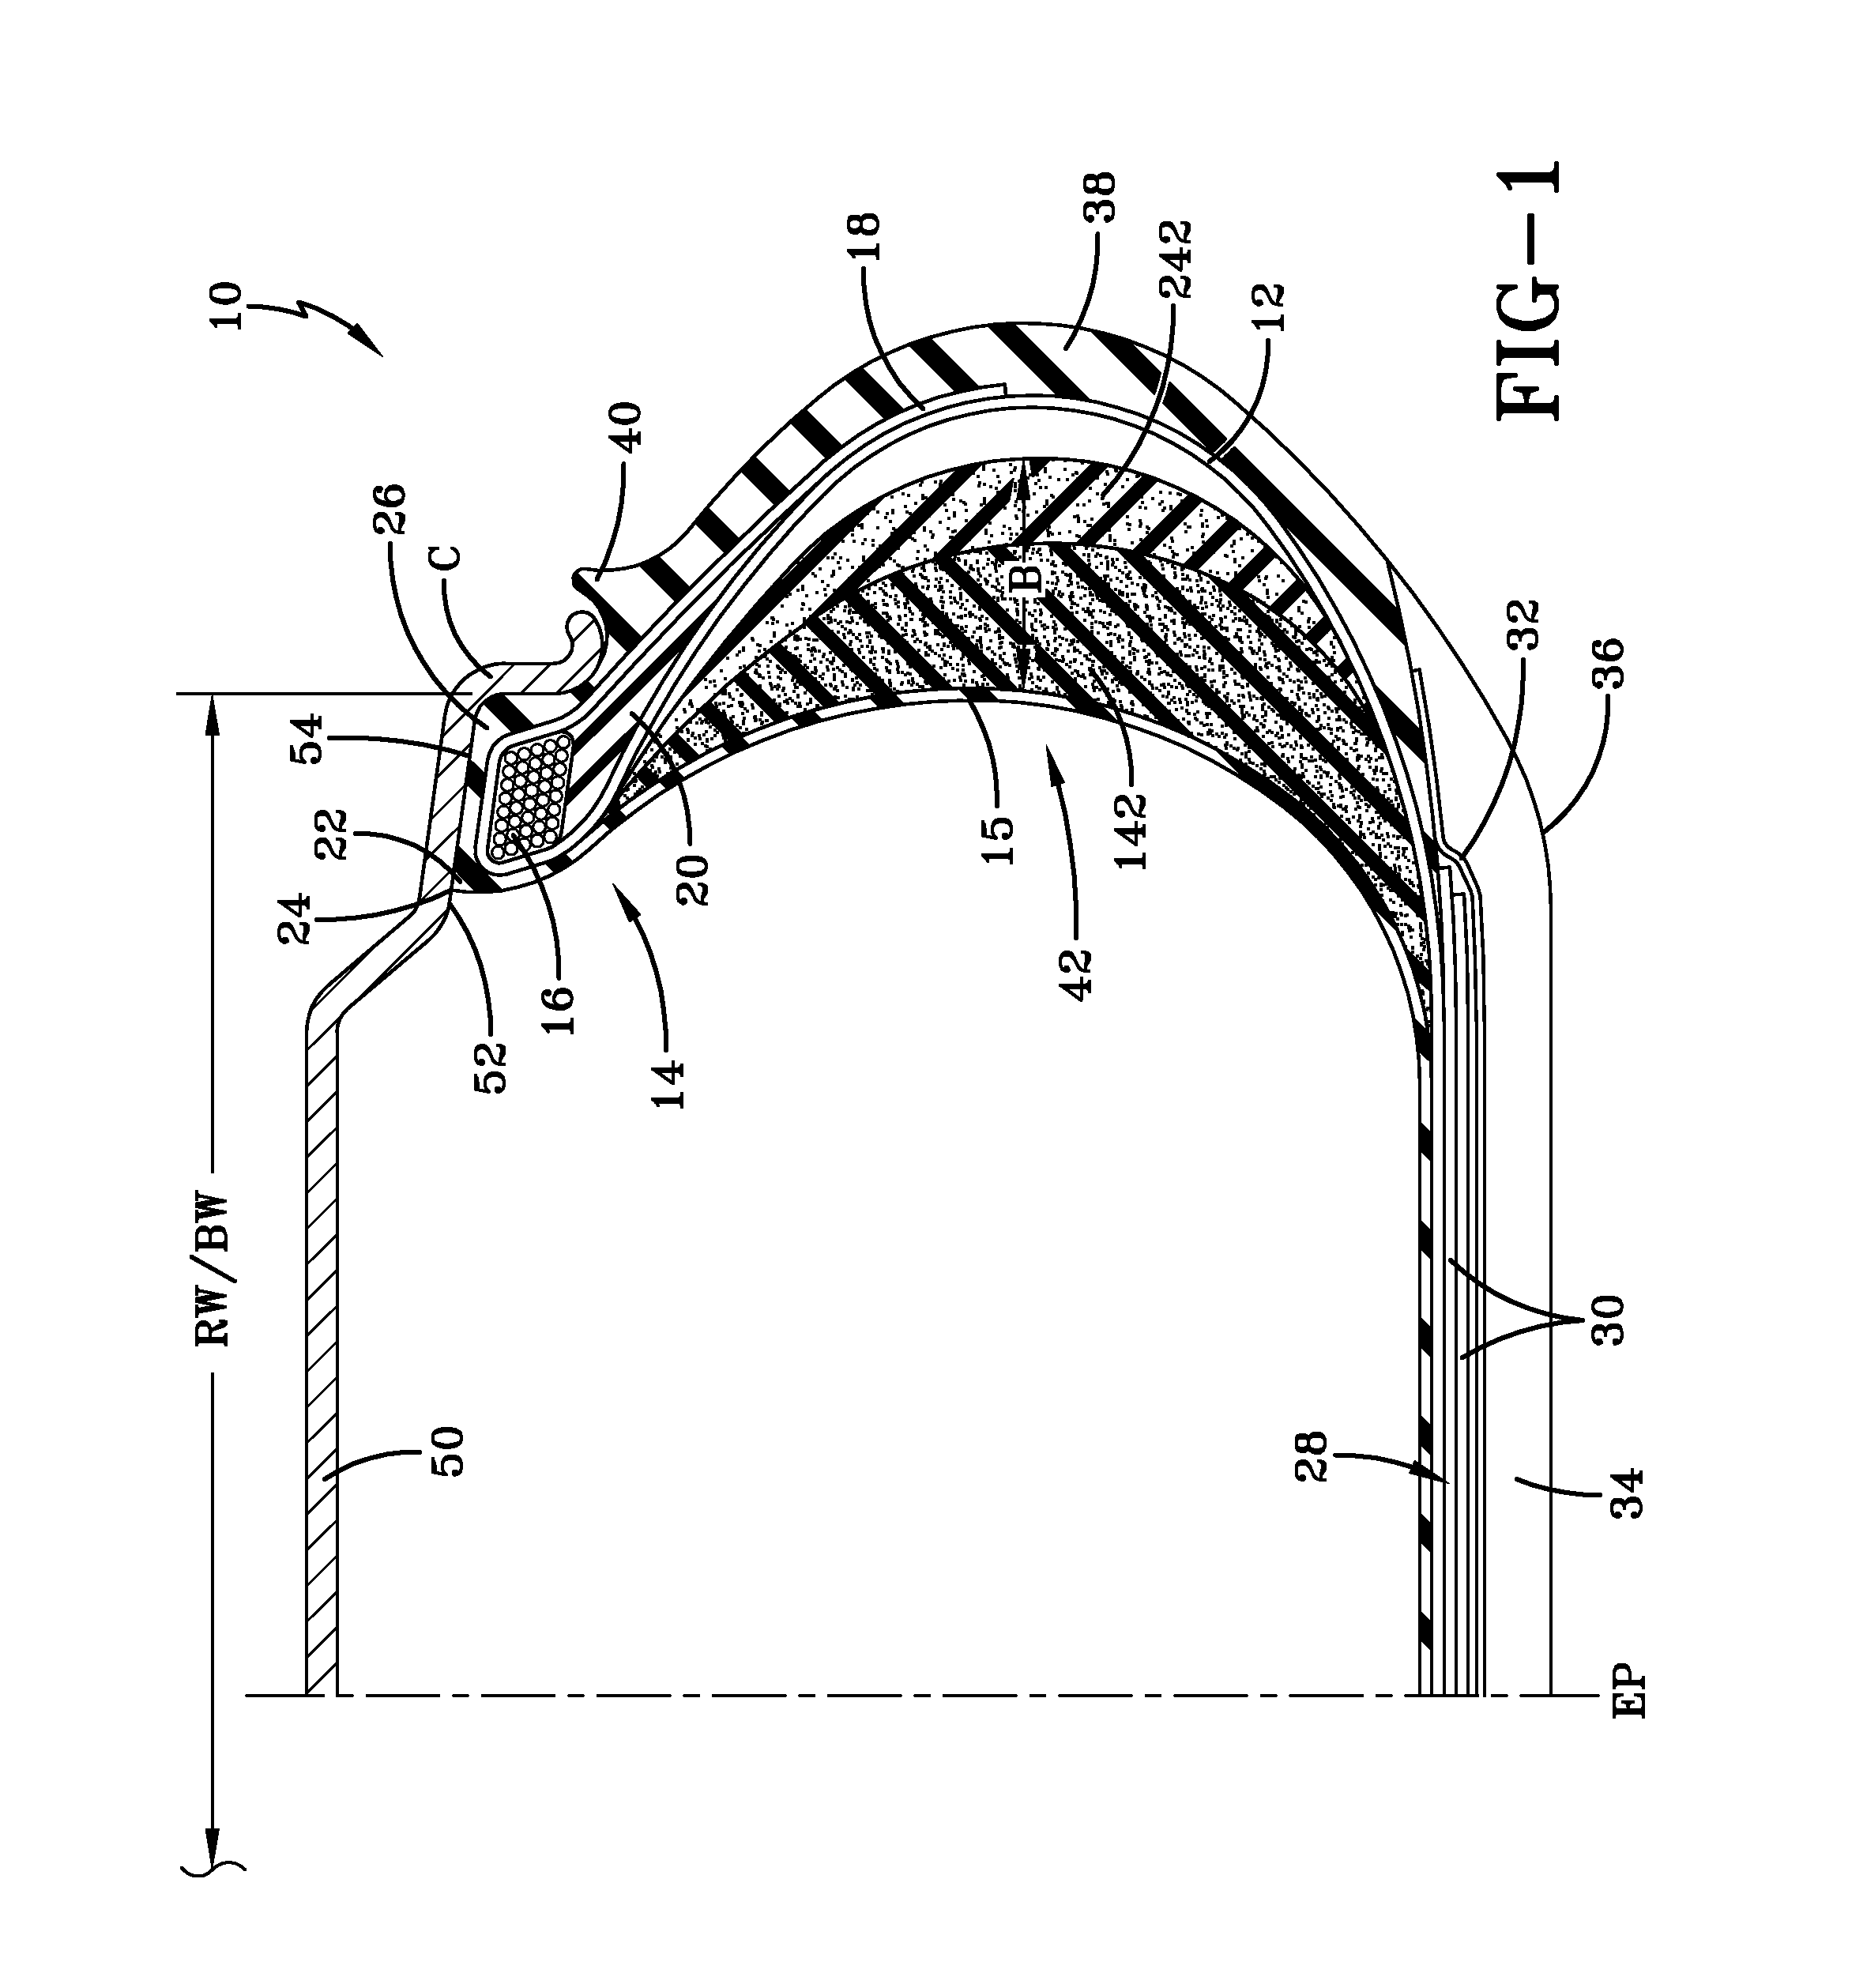 Self-supporting pneumatic tire